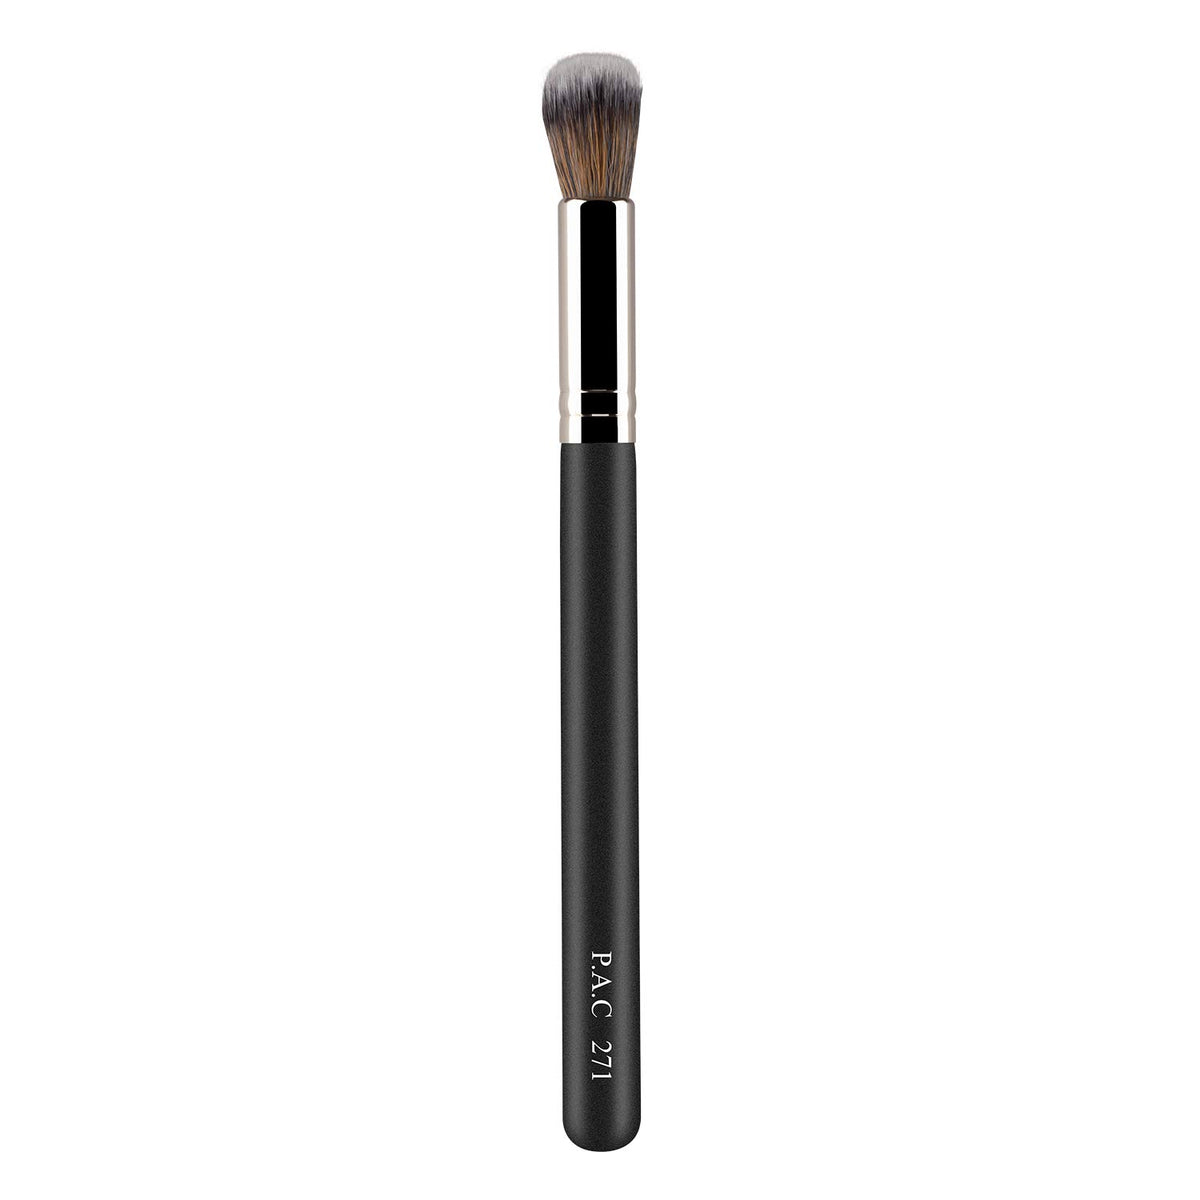 PAC Concealer Brush 271 PAC